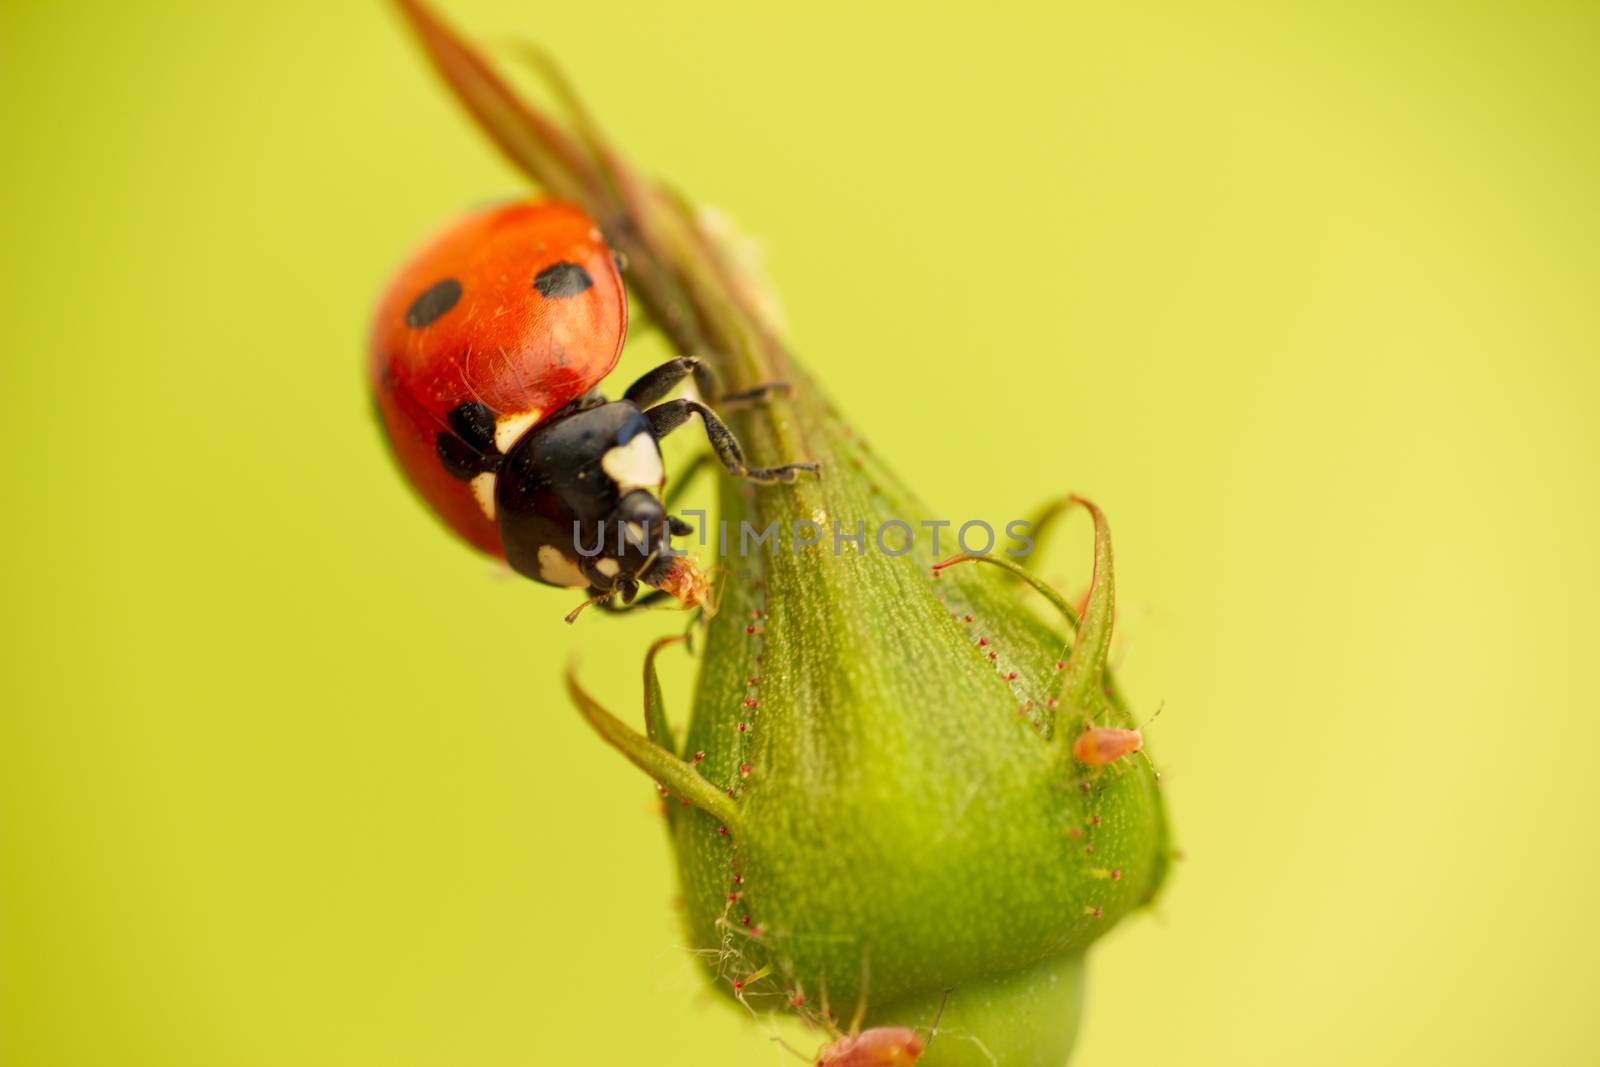 Ladybug attack aphids by Kidza